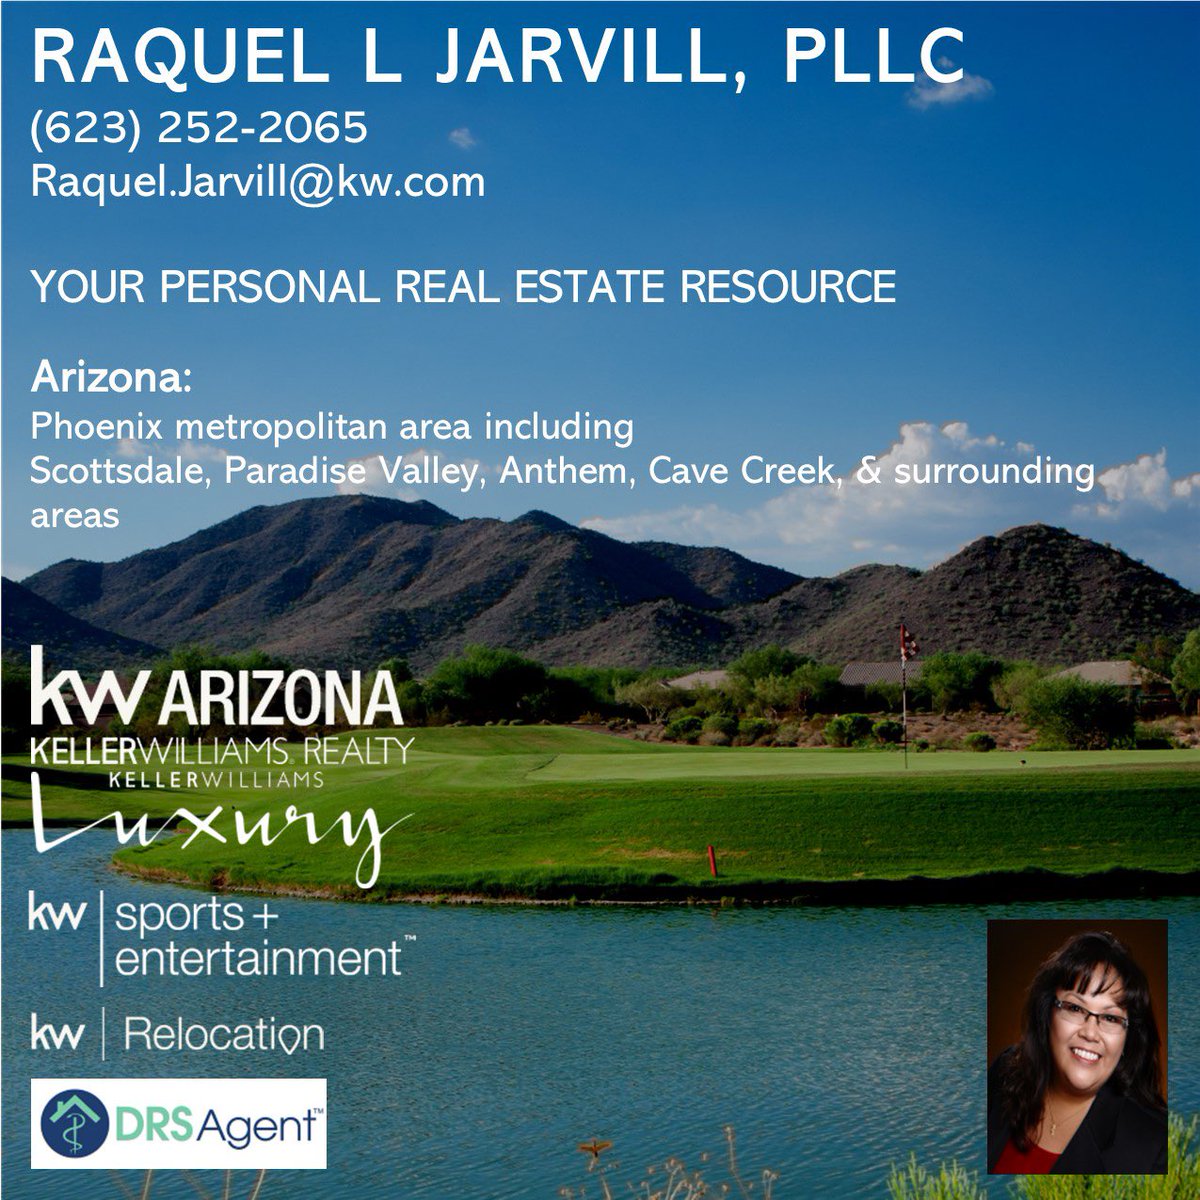 Honored to work with a loyal, repeat client since 2011 again! Are YOU or someone you know considering Selling a home, Buying a home, or Investing in real estate? Let’s get to work on YOUR real estate goals!
Raquel.Jarvill@kw.com

#sellhome #buyhome #invest #realestate